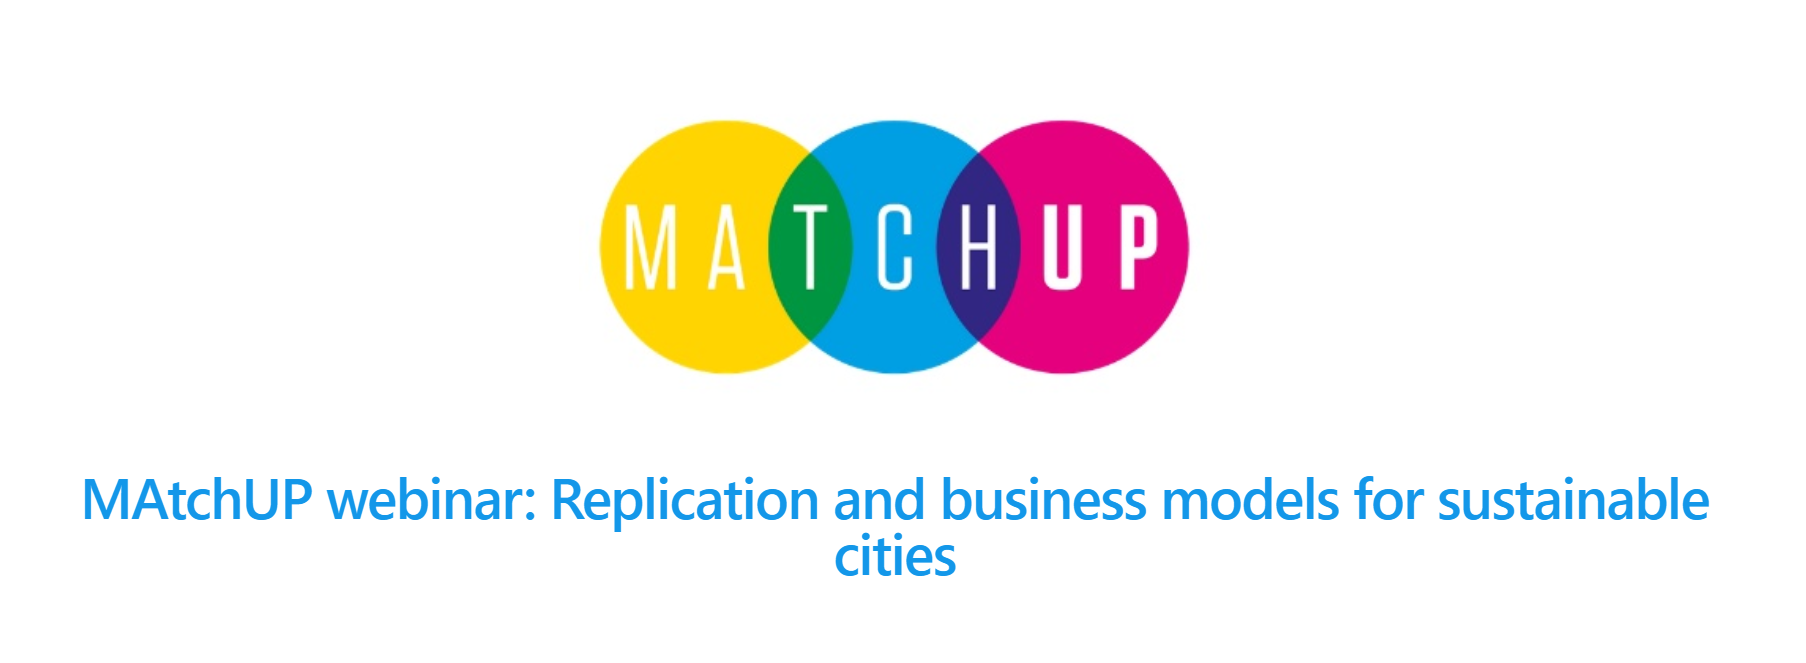 MAtchUP webinar: Replication and business models for sustainable cities